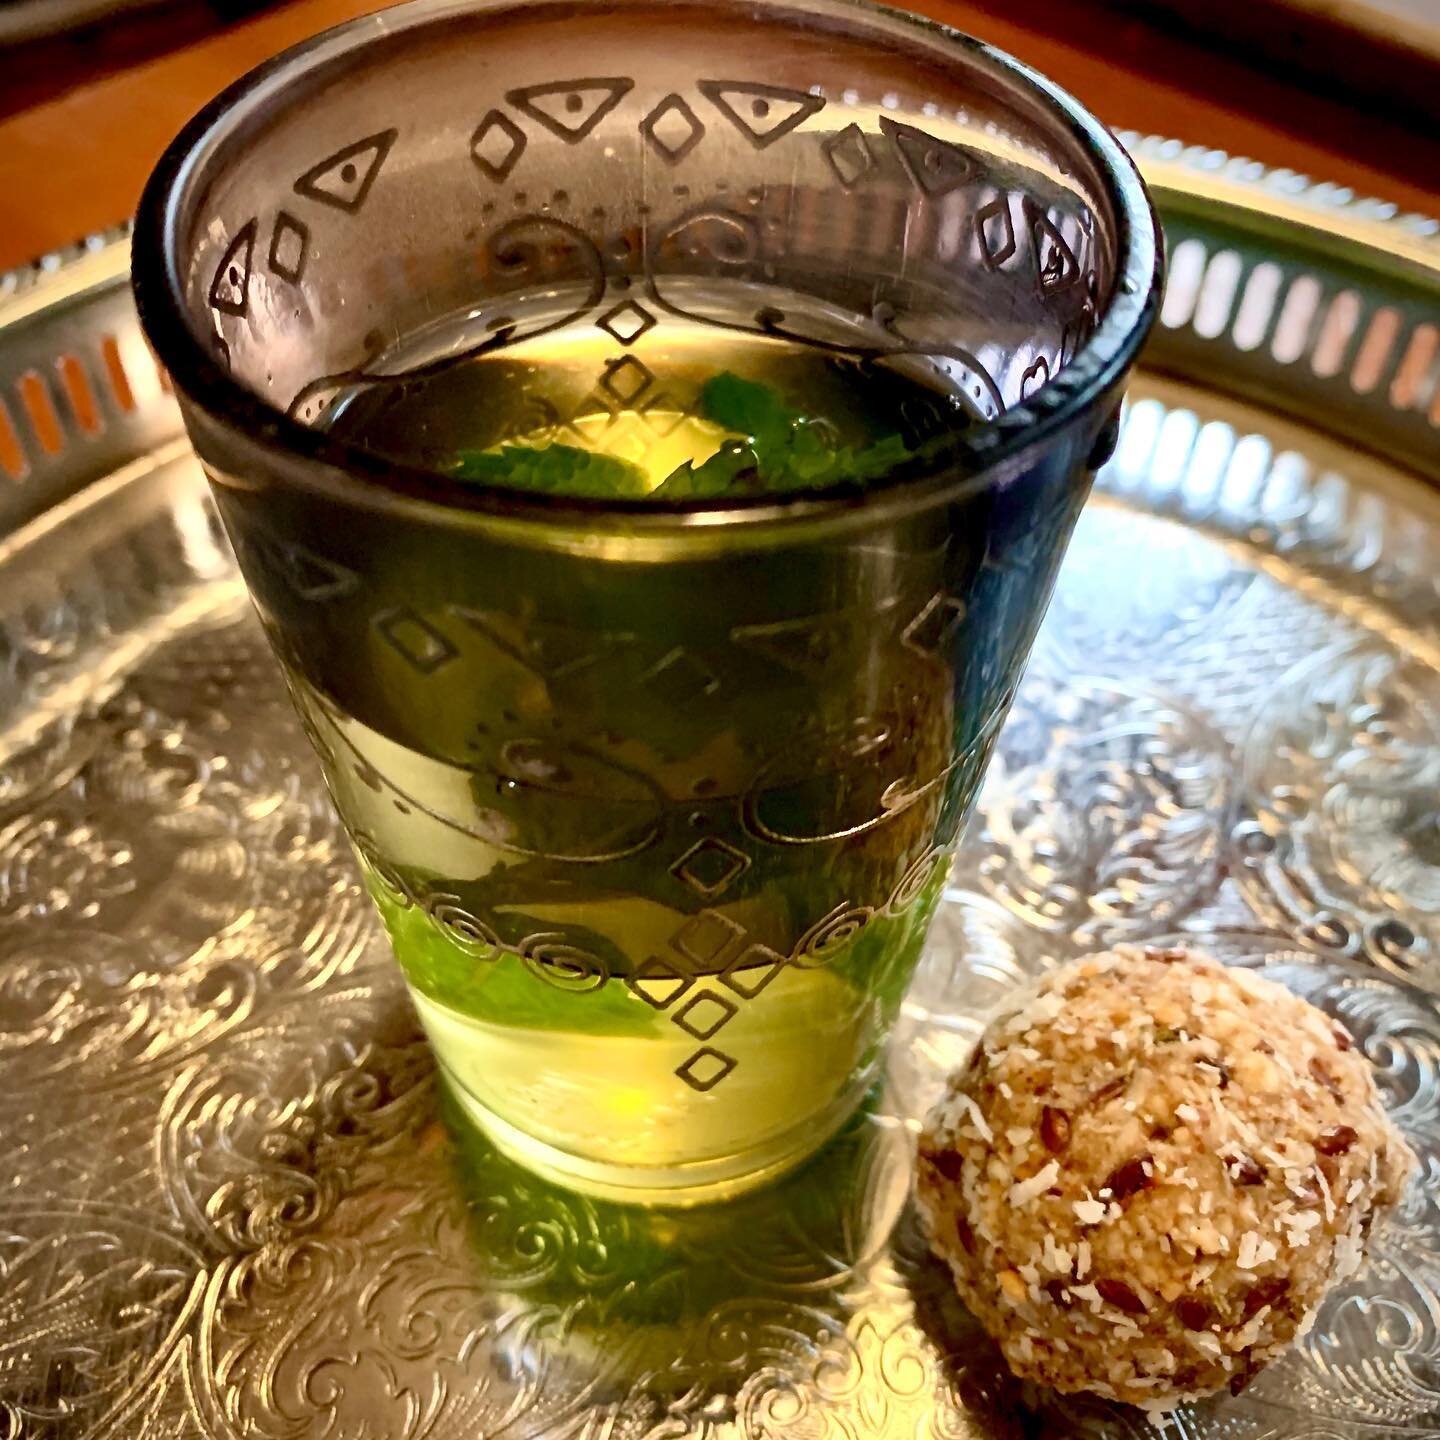 My two favourite  afternoon snacks 😋 Moroccan Green Tea with Mint with my home made Coconut + Nuts and Seeds Energy Ball 😋

#afternoonsnack #teatime #delicious #wholefoods #mymoroccangalley #minttea